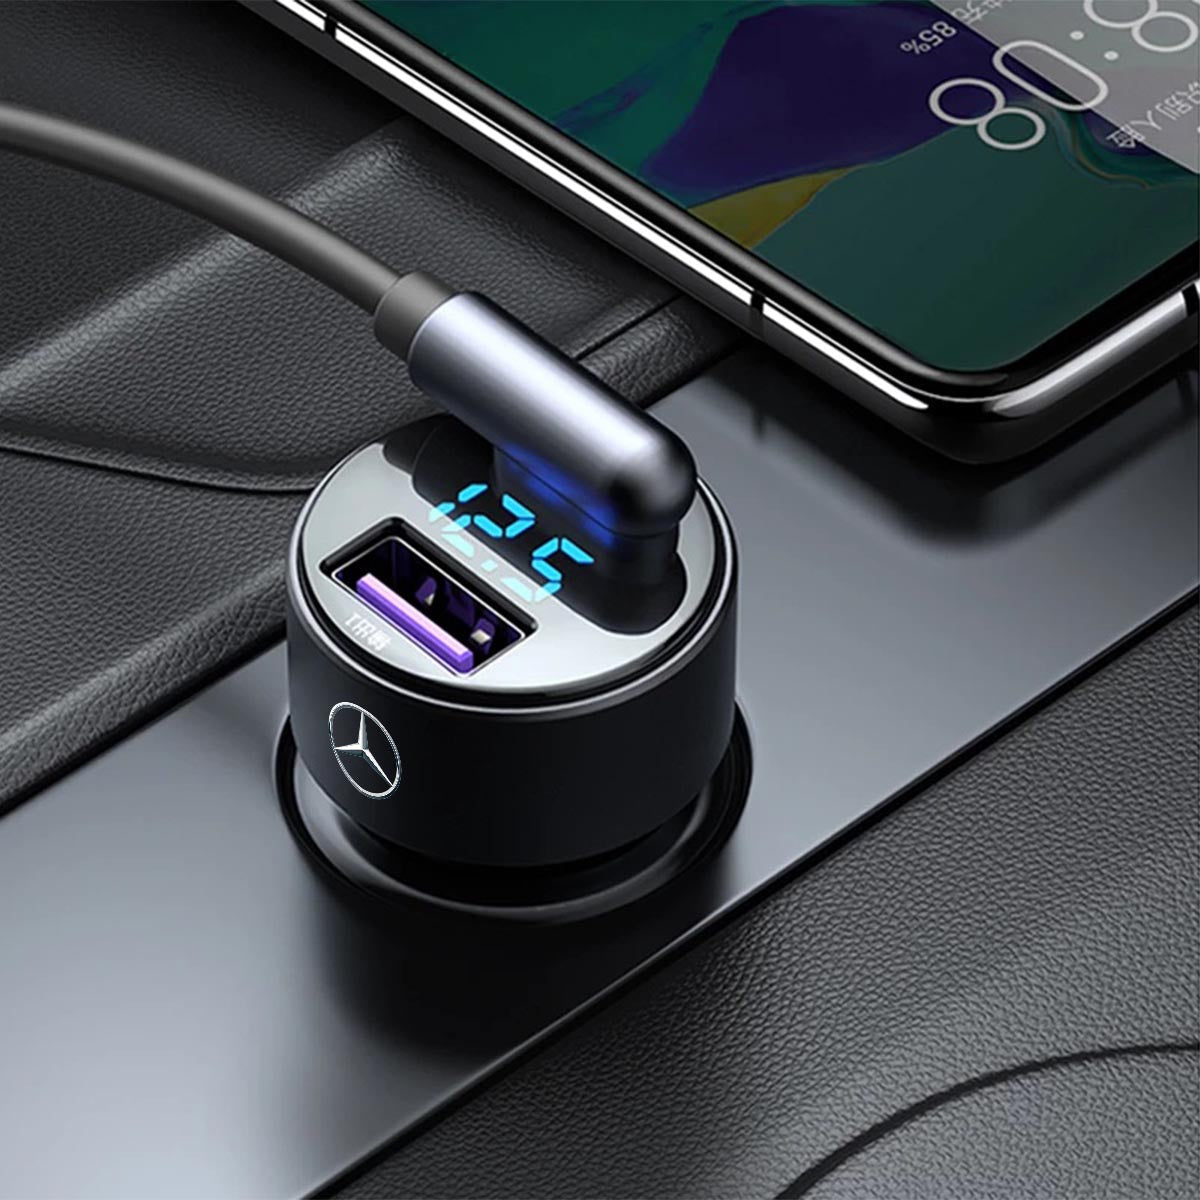 USB Charger Adapter, Custom fit for car, Dual QC3.0 Ports Car Charger, All Metal Quick Charge with LED Voltage Display, Cigarette Lighter Car Adapter, Compatible with Phone, Tablet & More - Delicate Leather